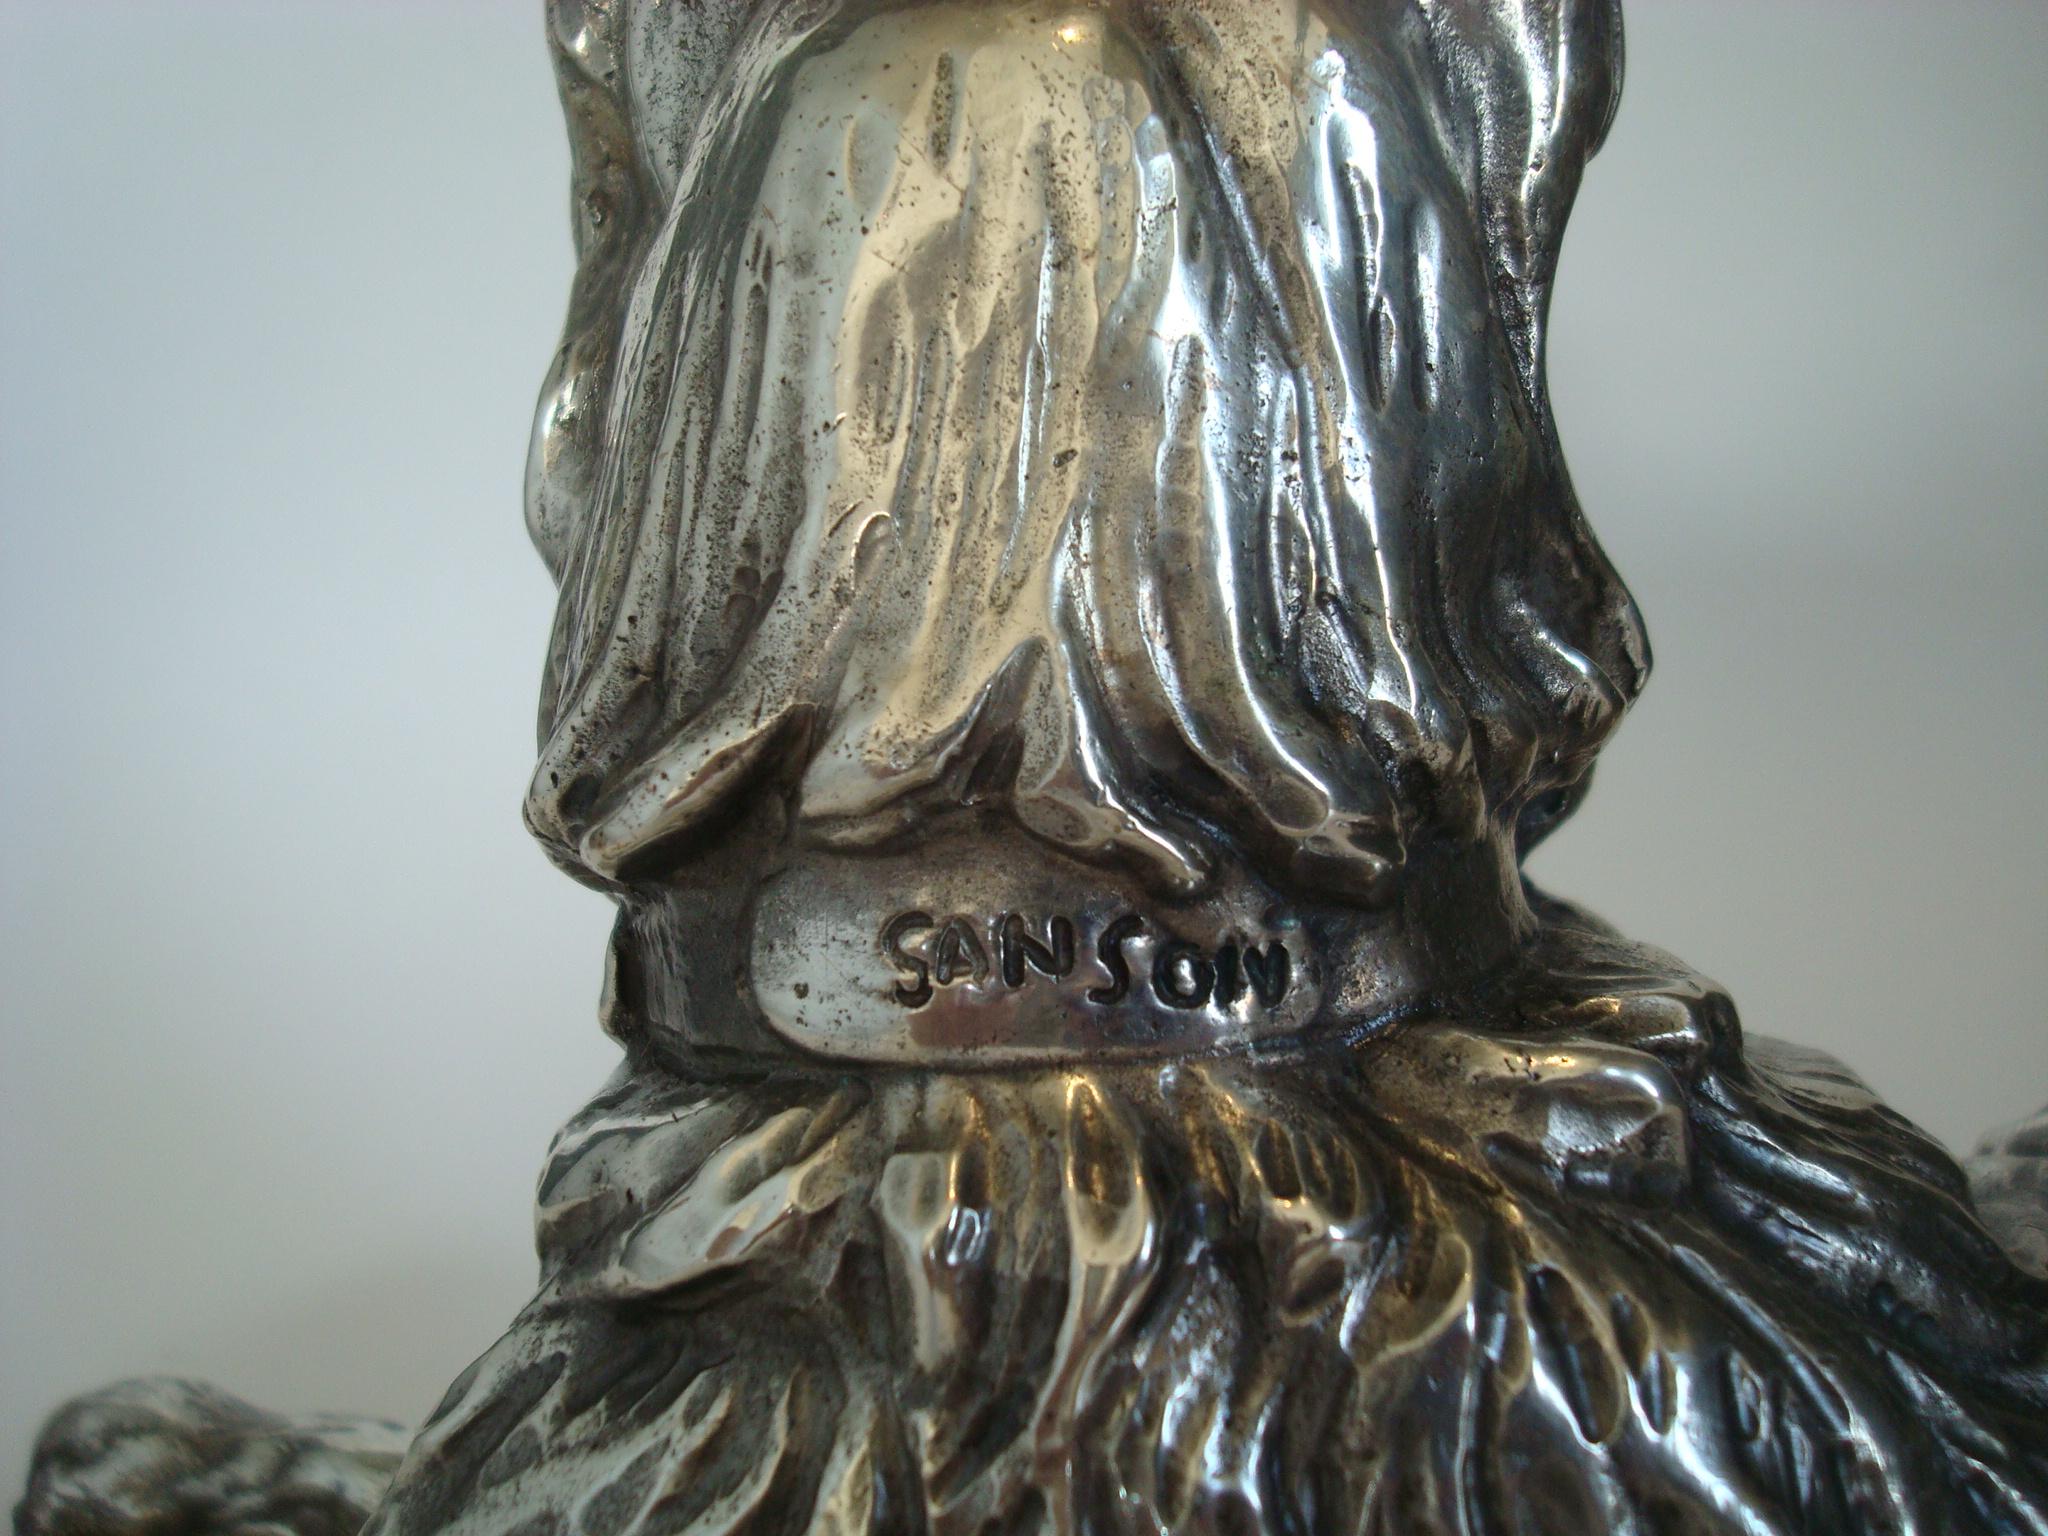 French Silvered Bronze Sculpture of a Briard Dog Signed Sanson, France, 1900